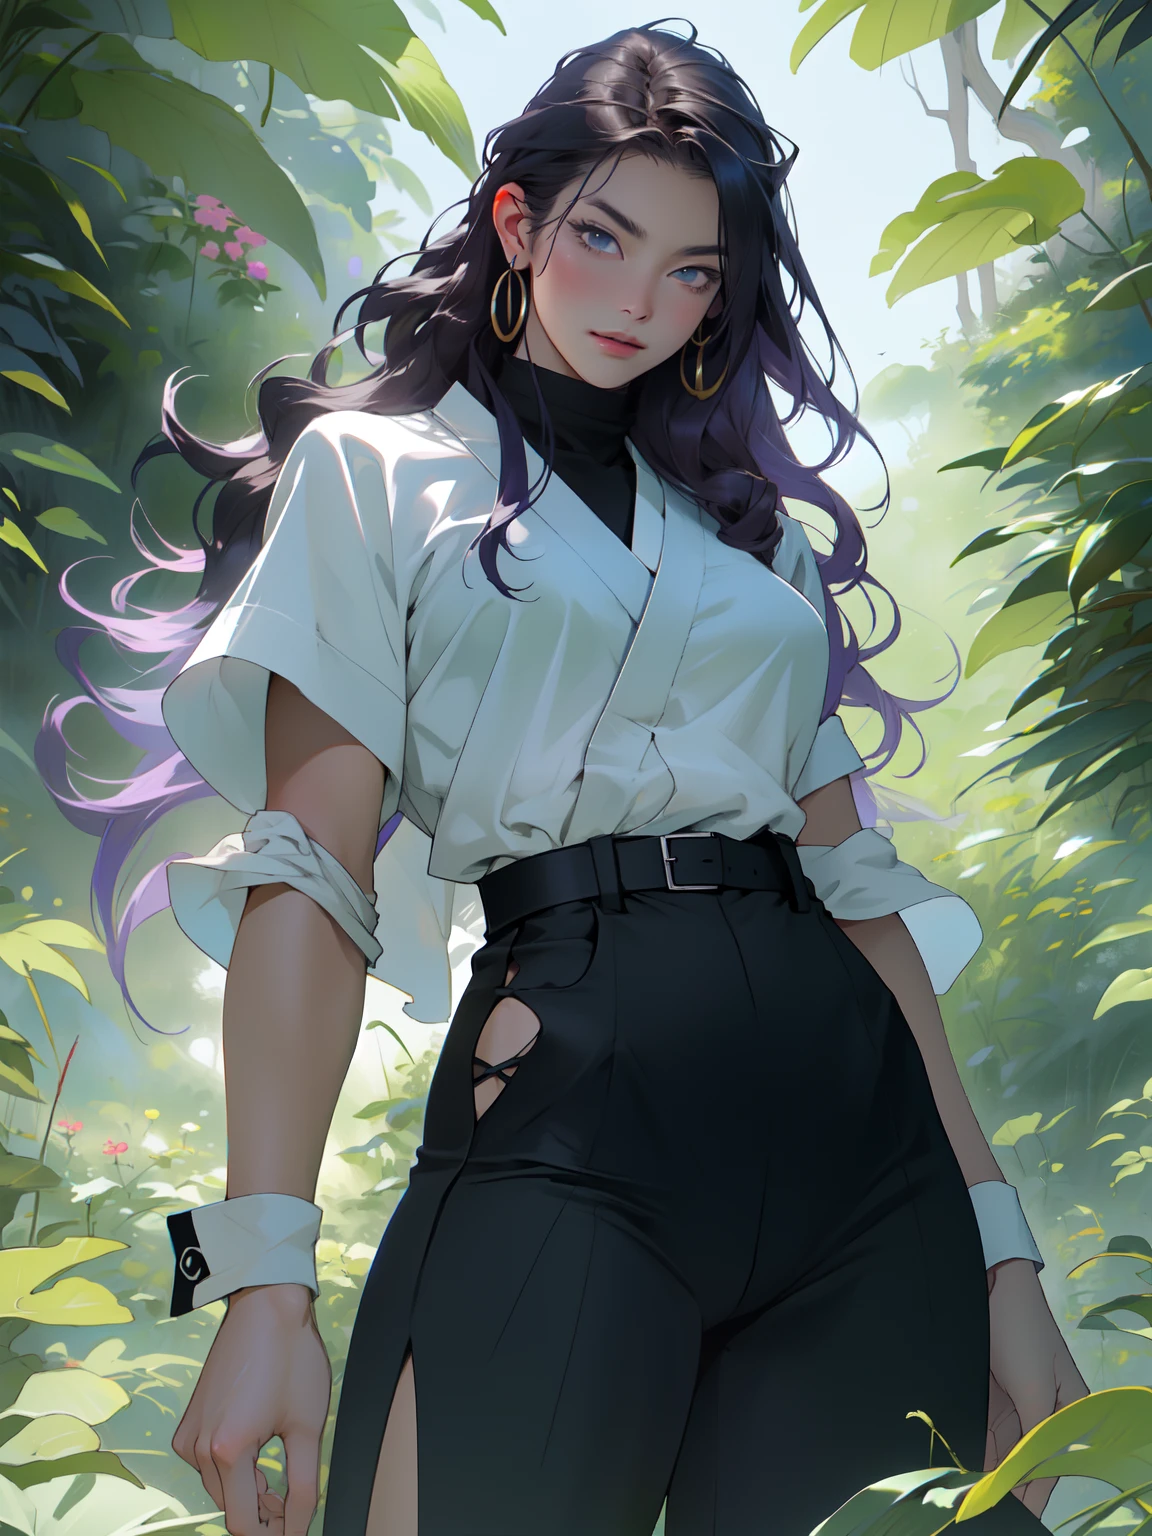 ((Best quality)), ((masterpiece)), ((realistic)), ((beautiful female martial artist)), (milf:1.3), (arrogant woman:1.4) standing tall, her slender form glistening in the golden rays of a summer sunrise. Her eyes, a captivating shade of emerald, pierce through the tranquility of the morning. Her fiery purple hair cascades, contrasting with the vibrant green of the surrounding foliage. With each step, her muscular thighs and perfect muscular long legs portray a sense of power and grace. The tranquil scene unfolds, capturing a moment of raw beauty and confidence on eye level, scenic, masterpiece,, abs, ((female focus:1.5)), very muscular ripped body, ultra sharp, (sexual suggestive)), traditional marcial korean costume, very thin waist, huge hips, fighting pose